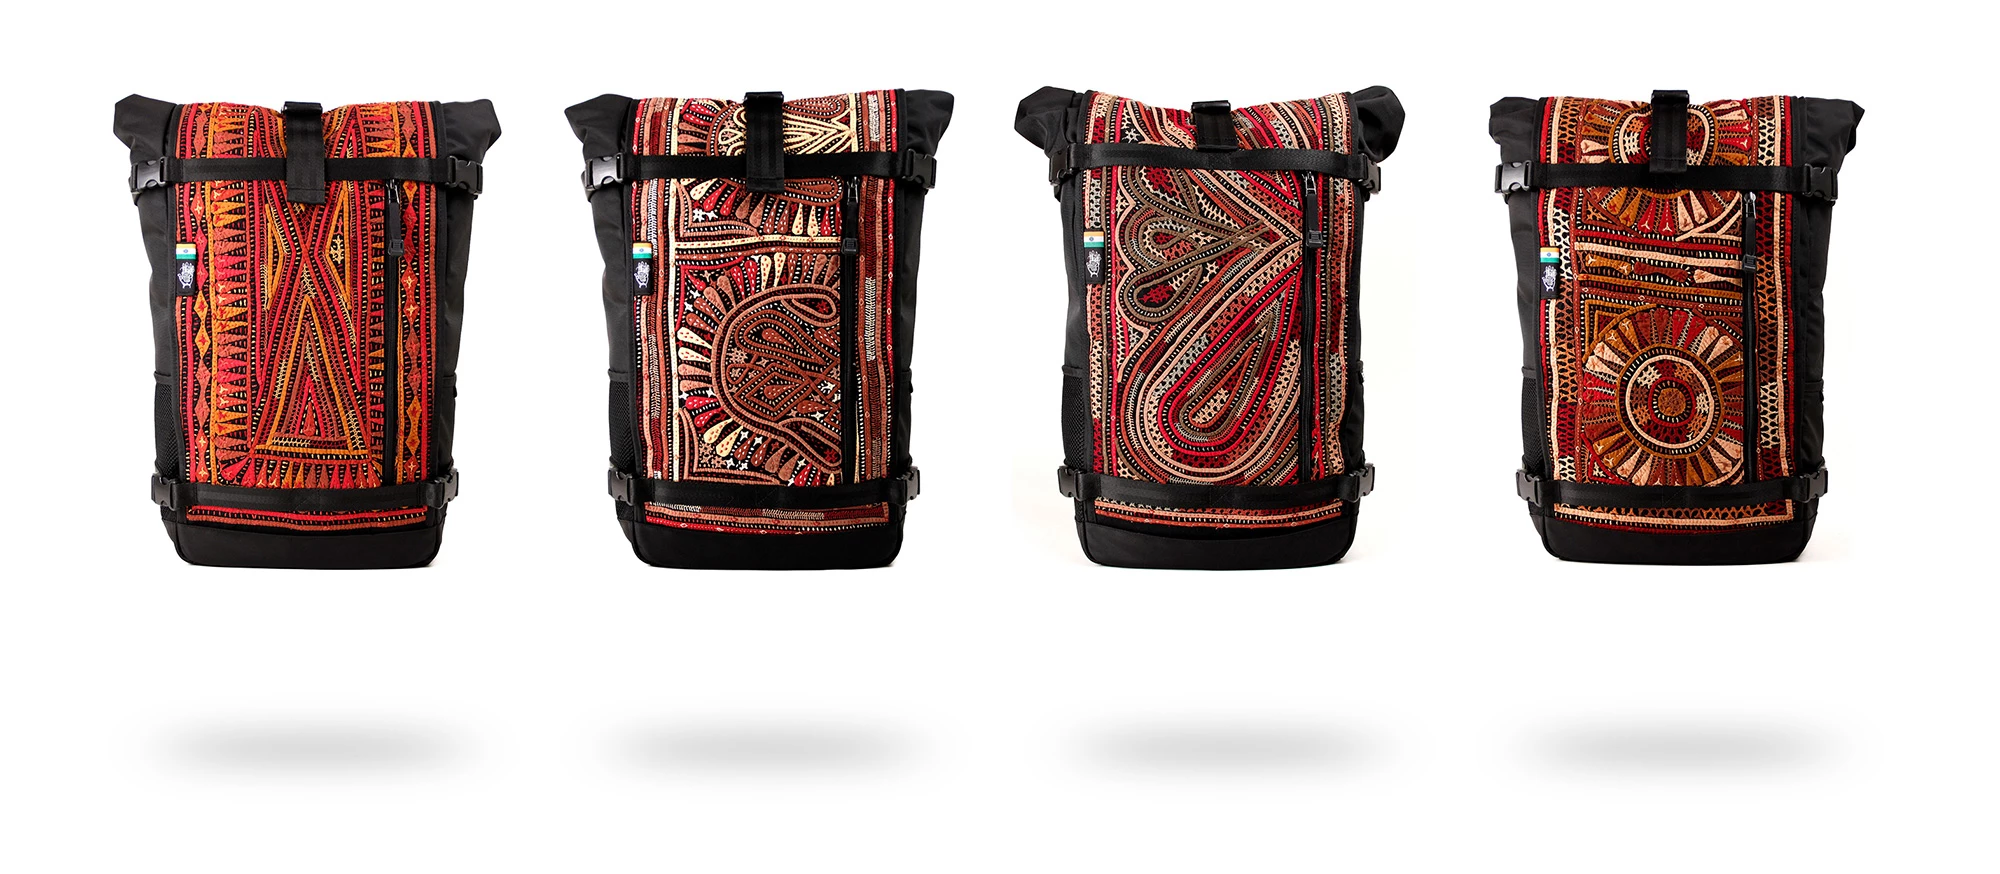 Limited edition Rabari collection of travel backpacks